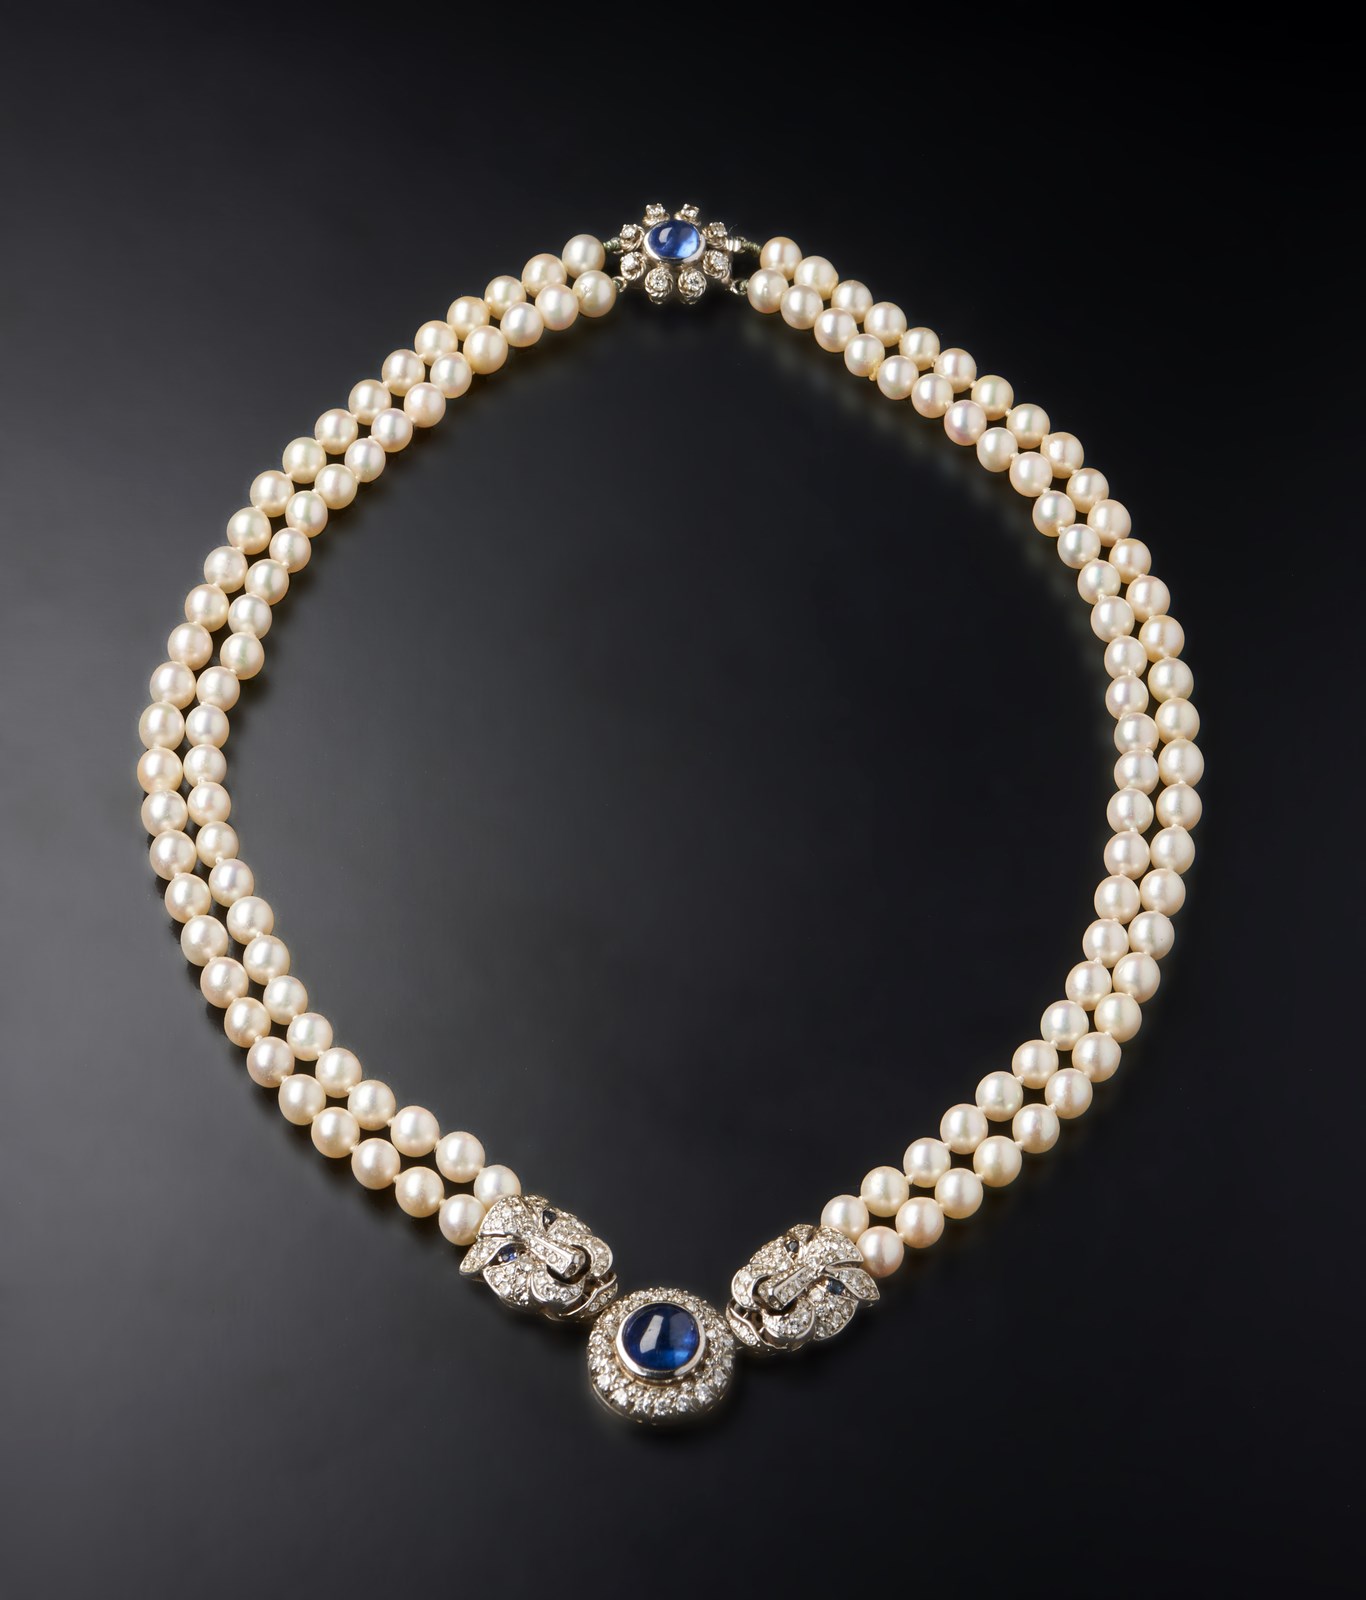 Impressive necklace with two strands of spherical white pearls of 7.00 mm with central pendant blue sapphire cabochon and, mixed cut diamonds (huit huit and brilliant) of about 3.00 carats total.  (. )